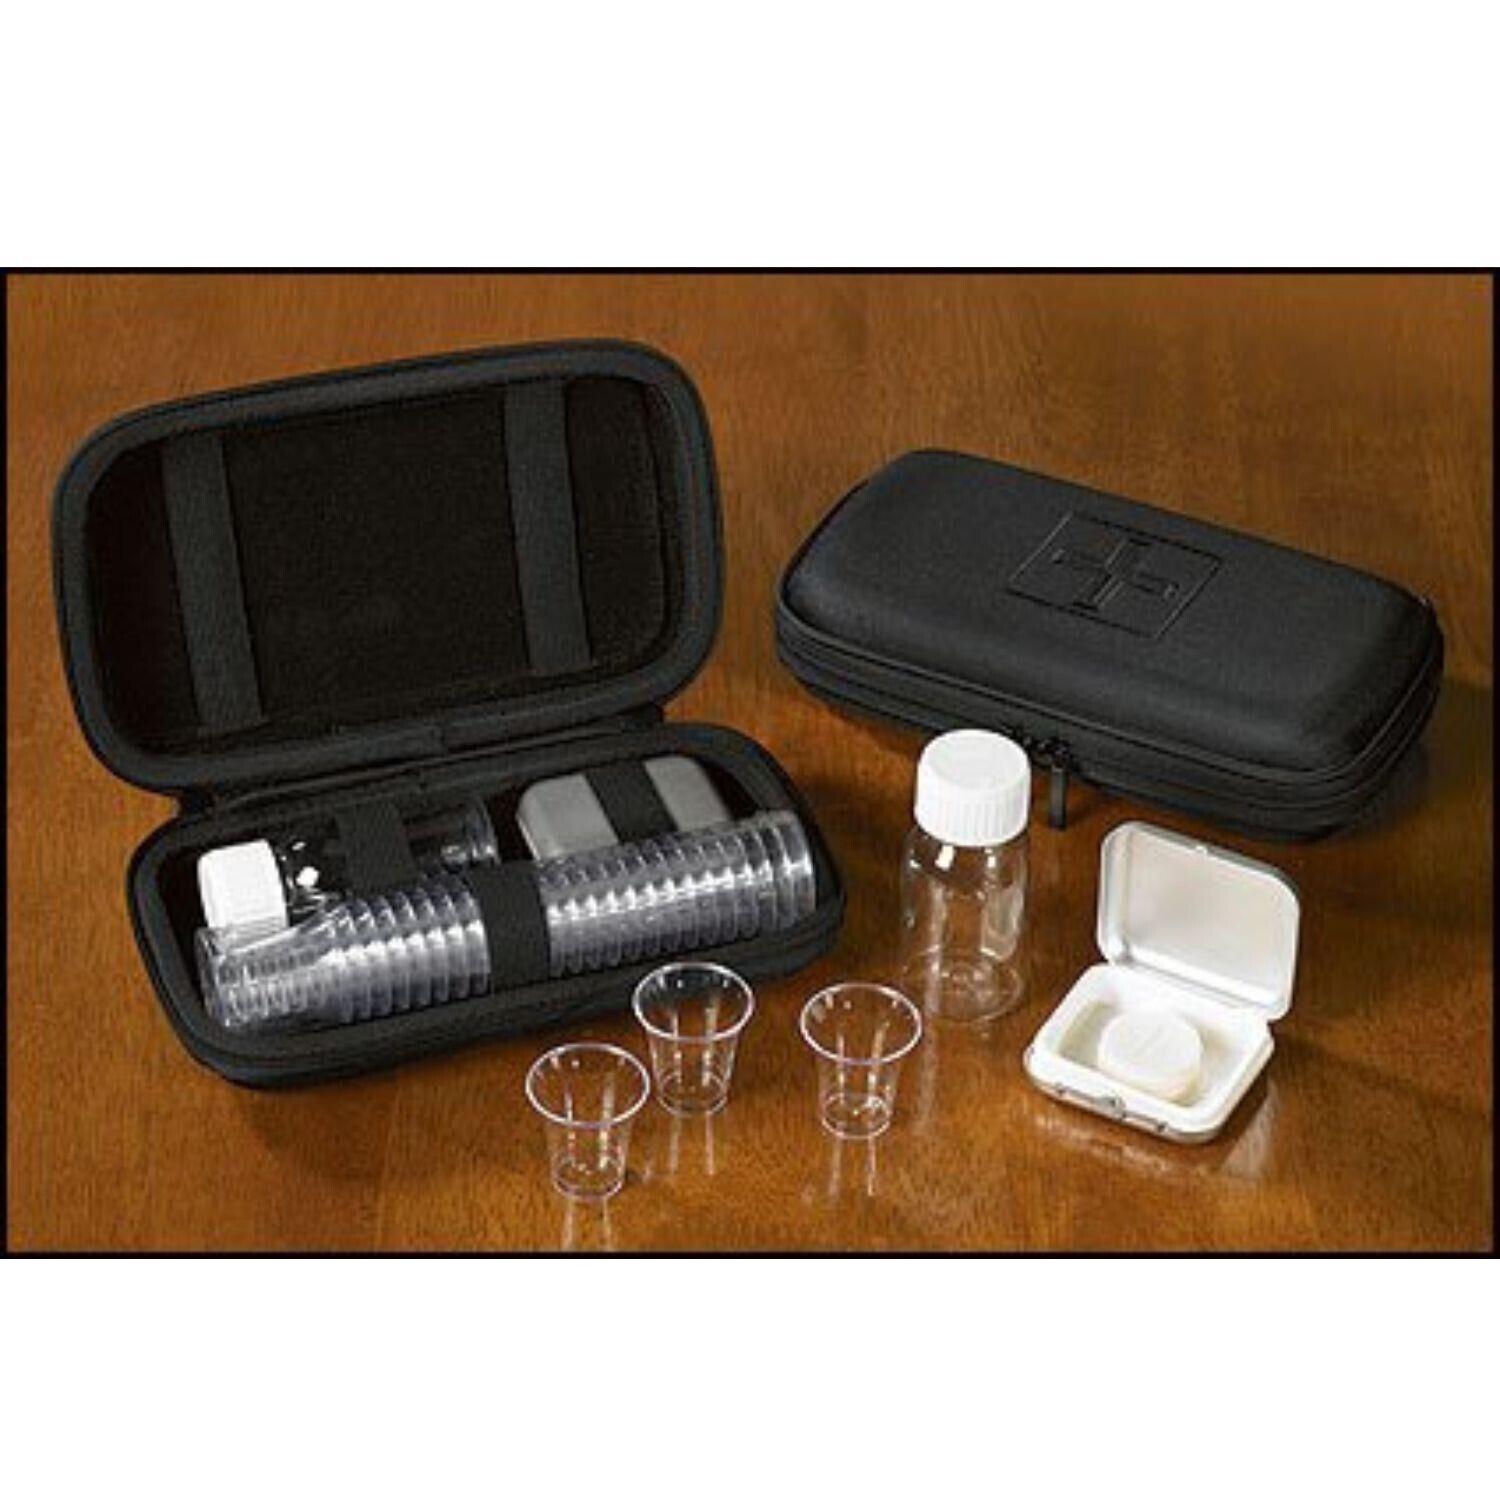 Deluxe Disposable Mass Communion Kit in Travel Case For Church or Sanctuary 9 In